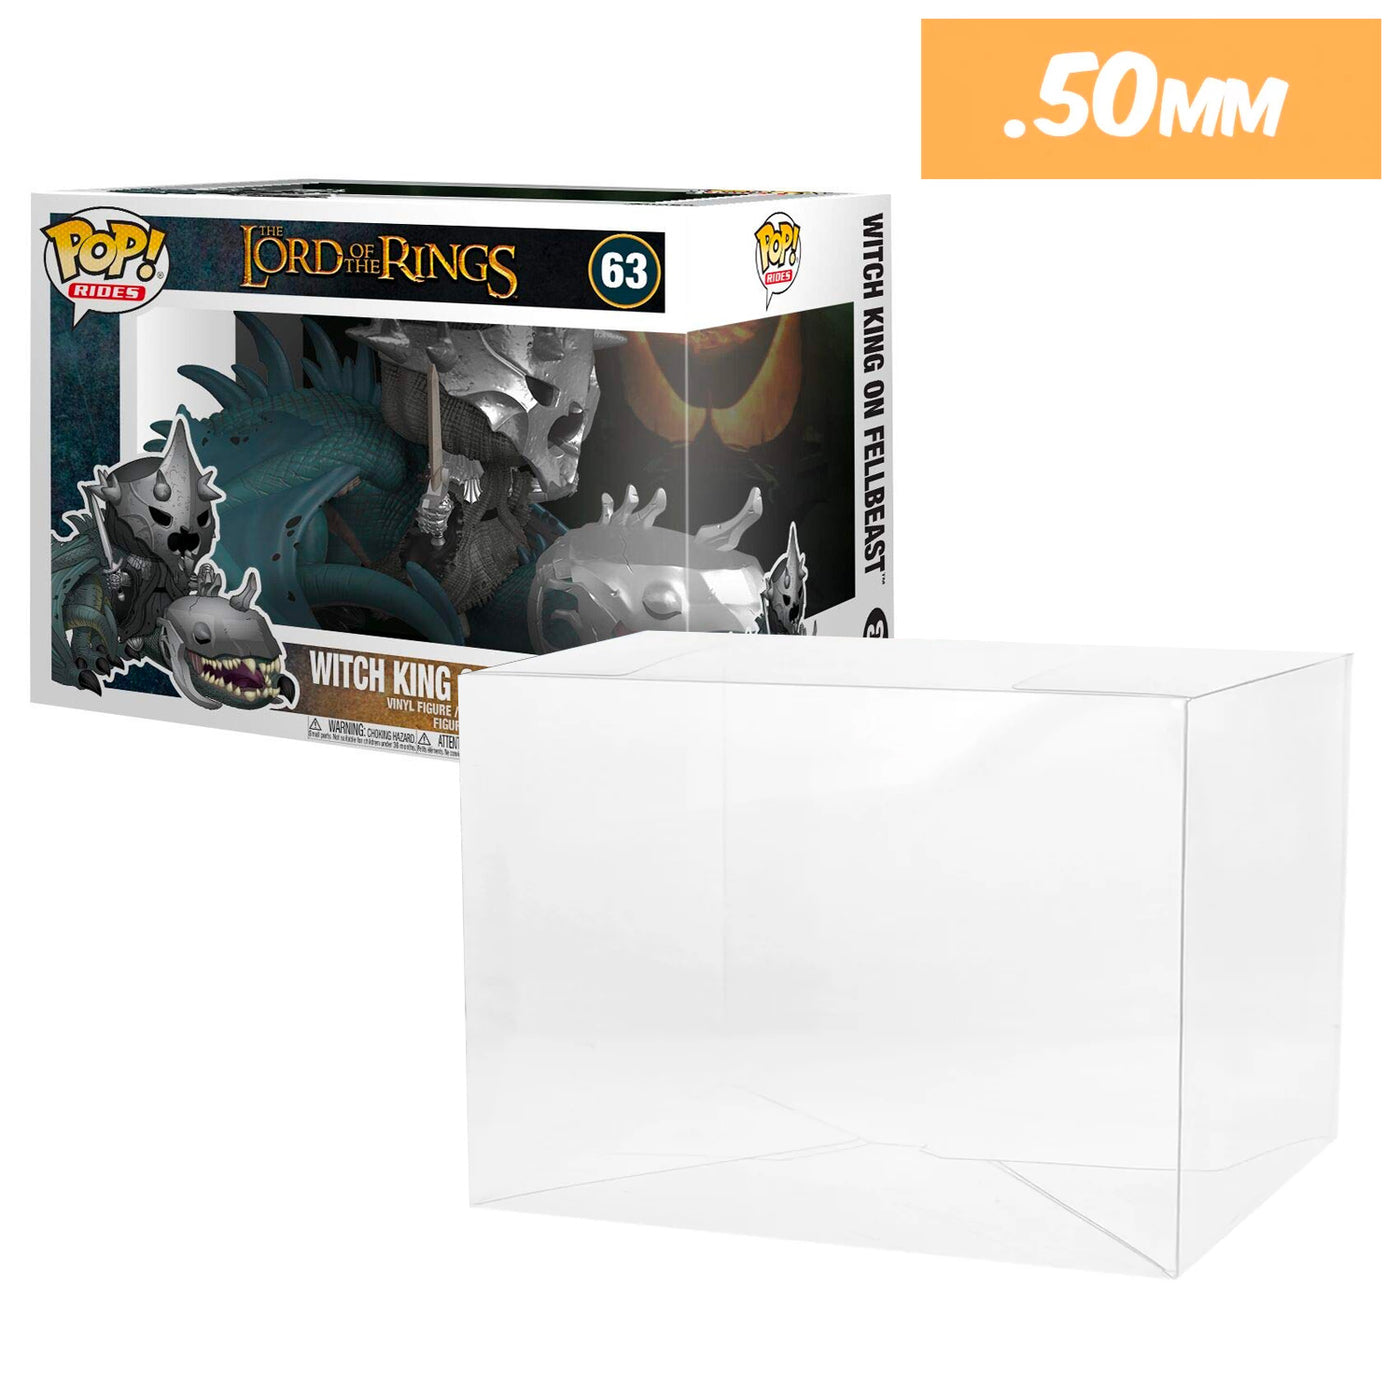 witch king on fellbeast pop rides best funko pop protectors thick strong uv scratch flat top stack vinyl display geek plastic shield vaulted eco armor fits collect protect display case kollector protector